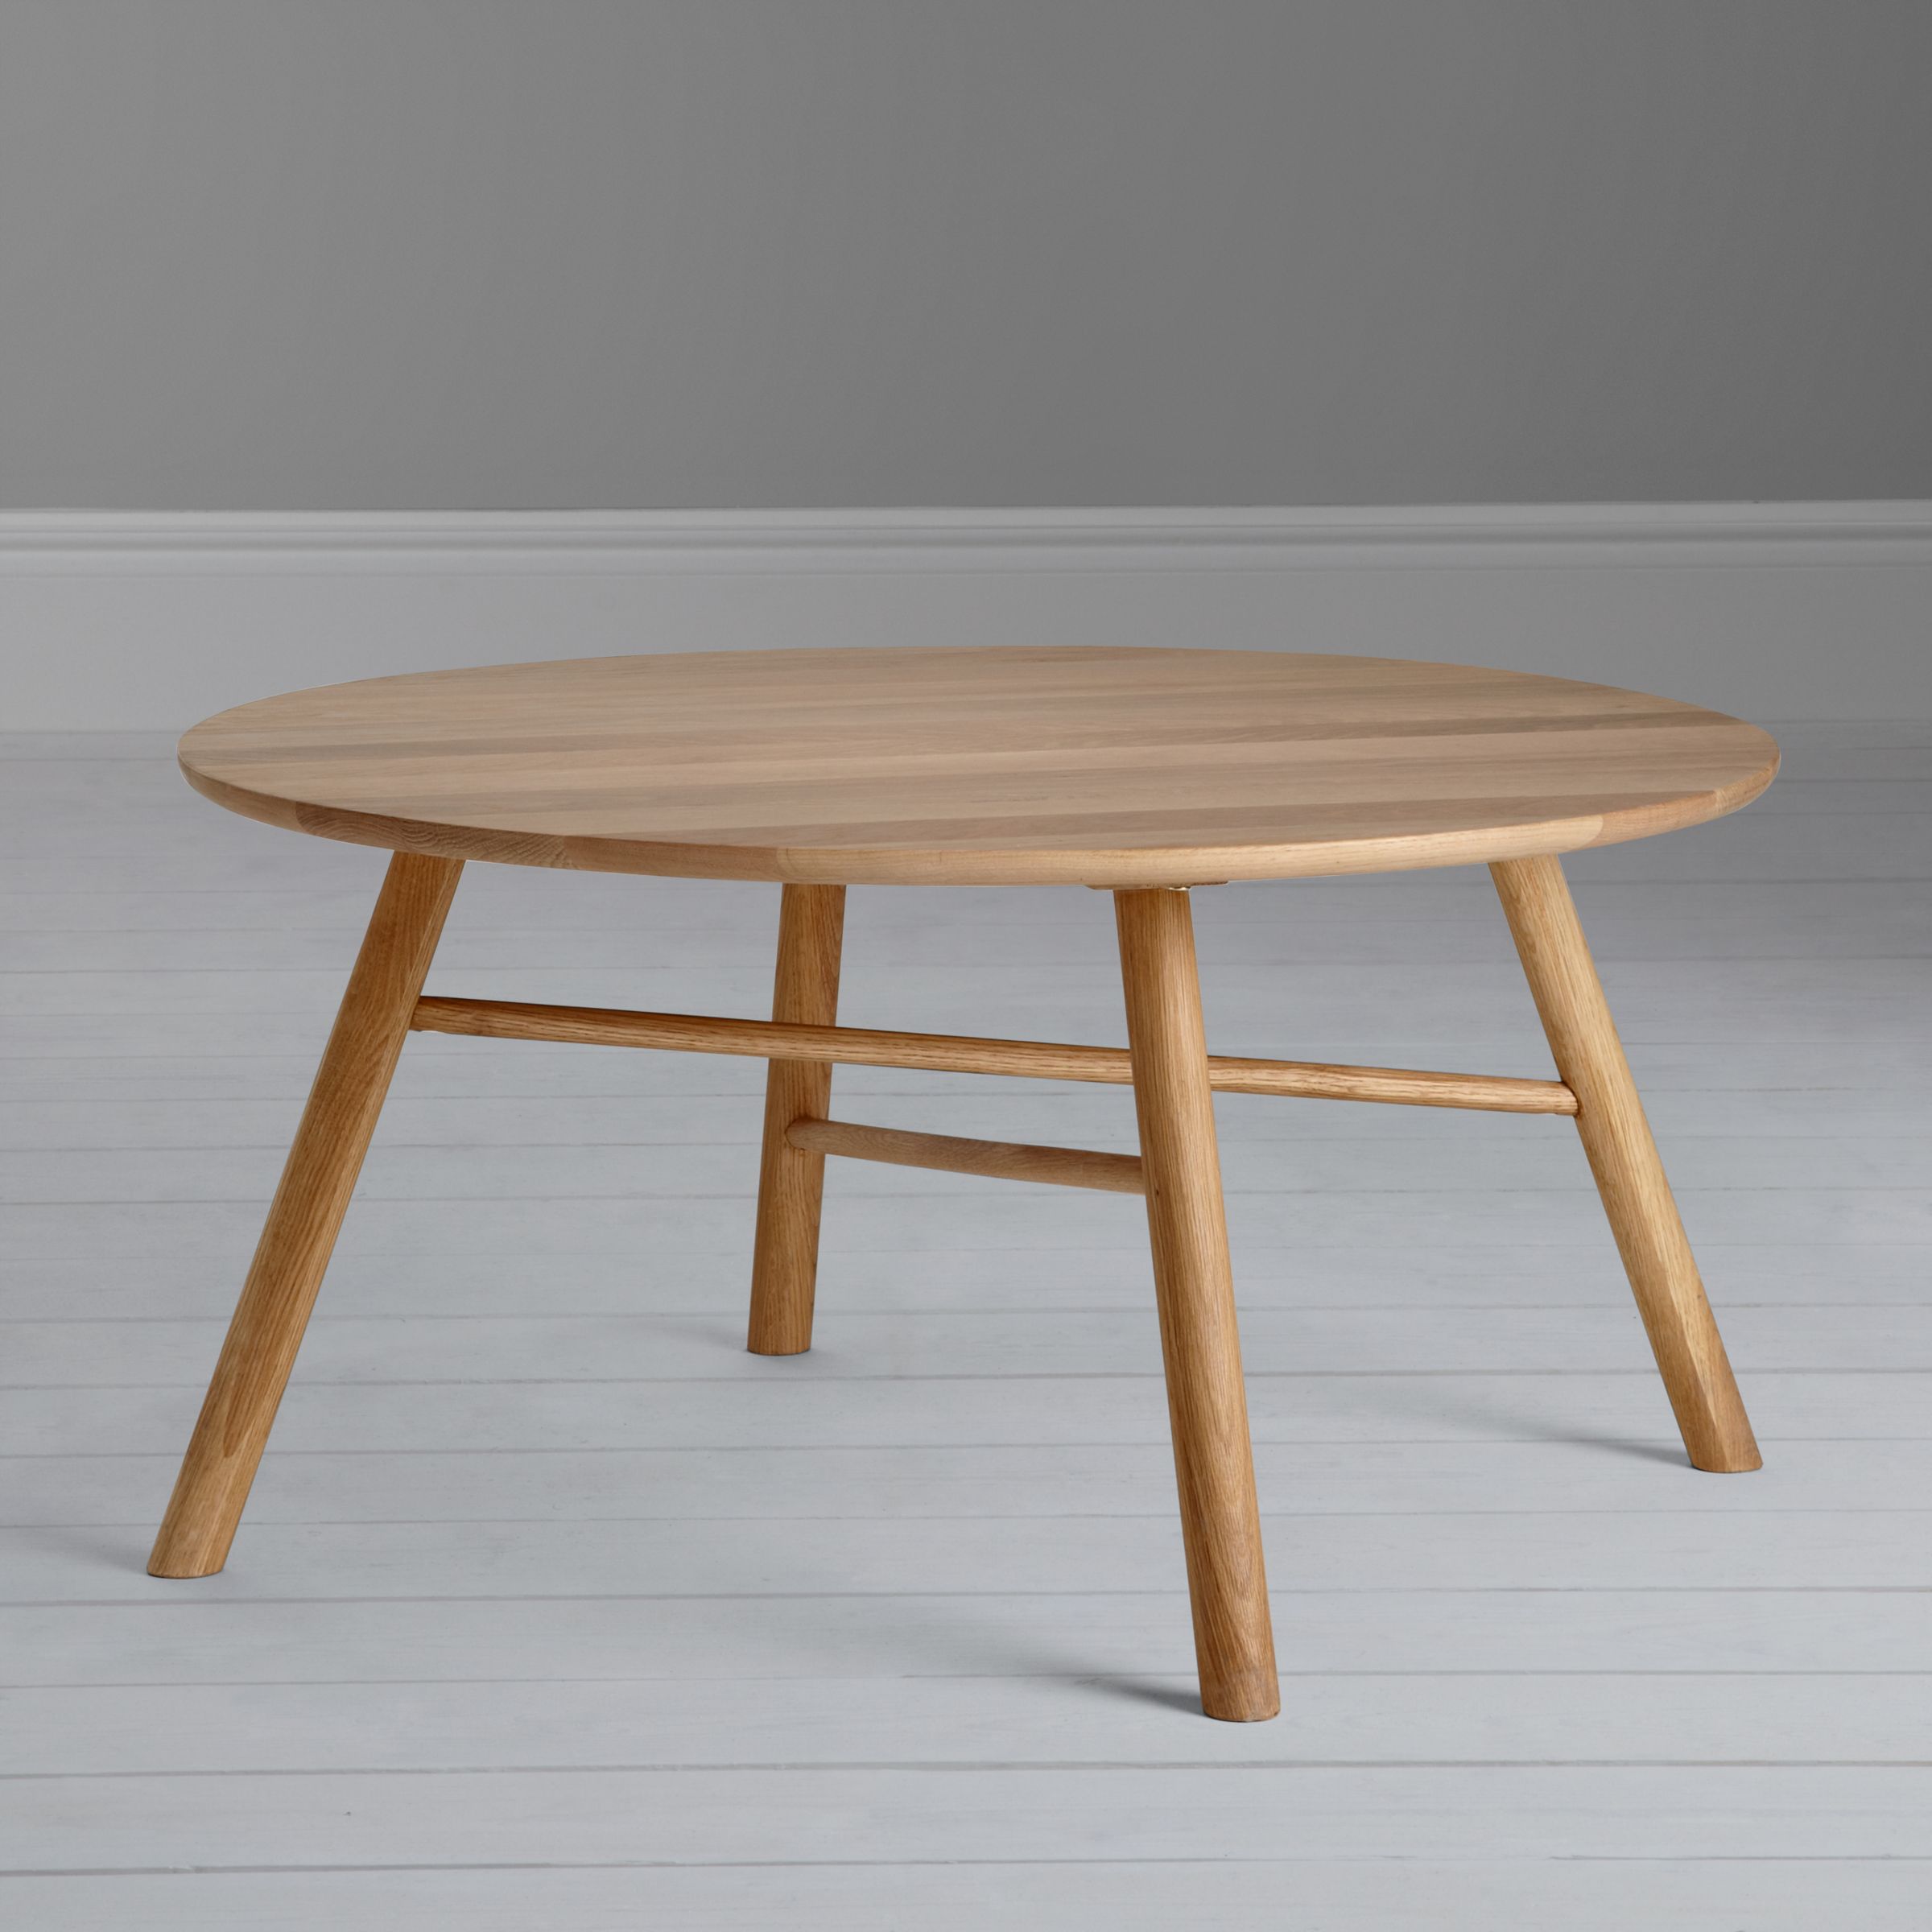 Says Who for John Lewis Why Wood Coffee Table, Oak at John Lewis & Partners